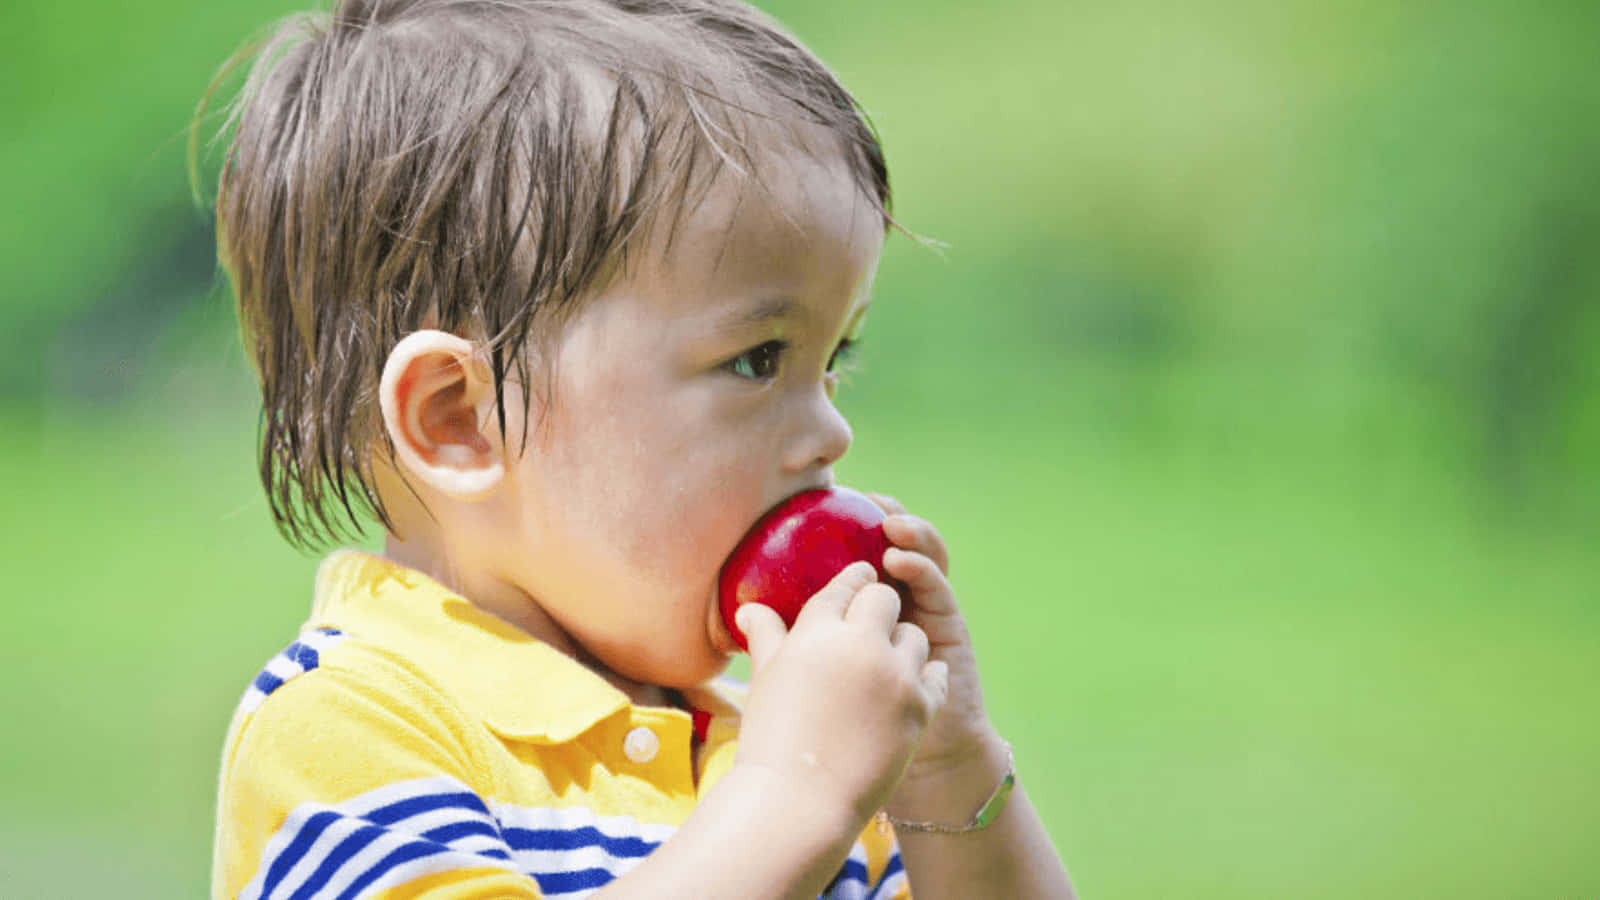 A Young Boy Eating An Apple Background